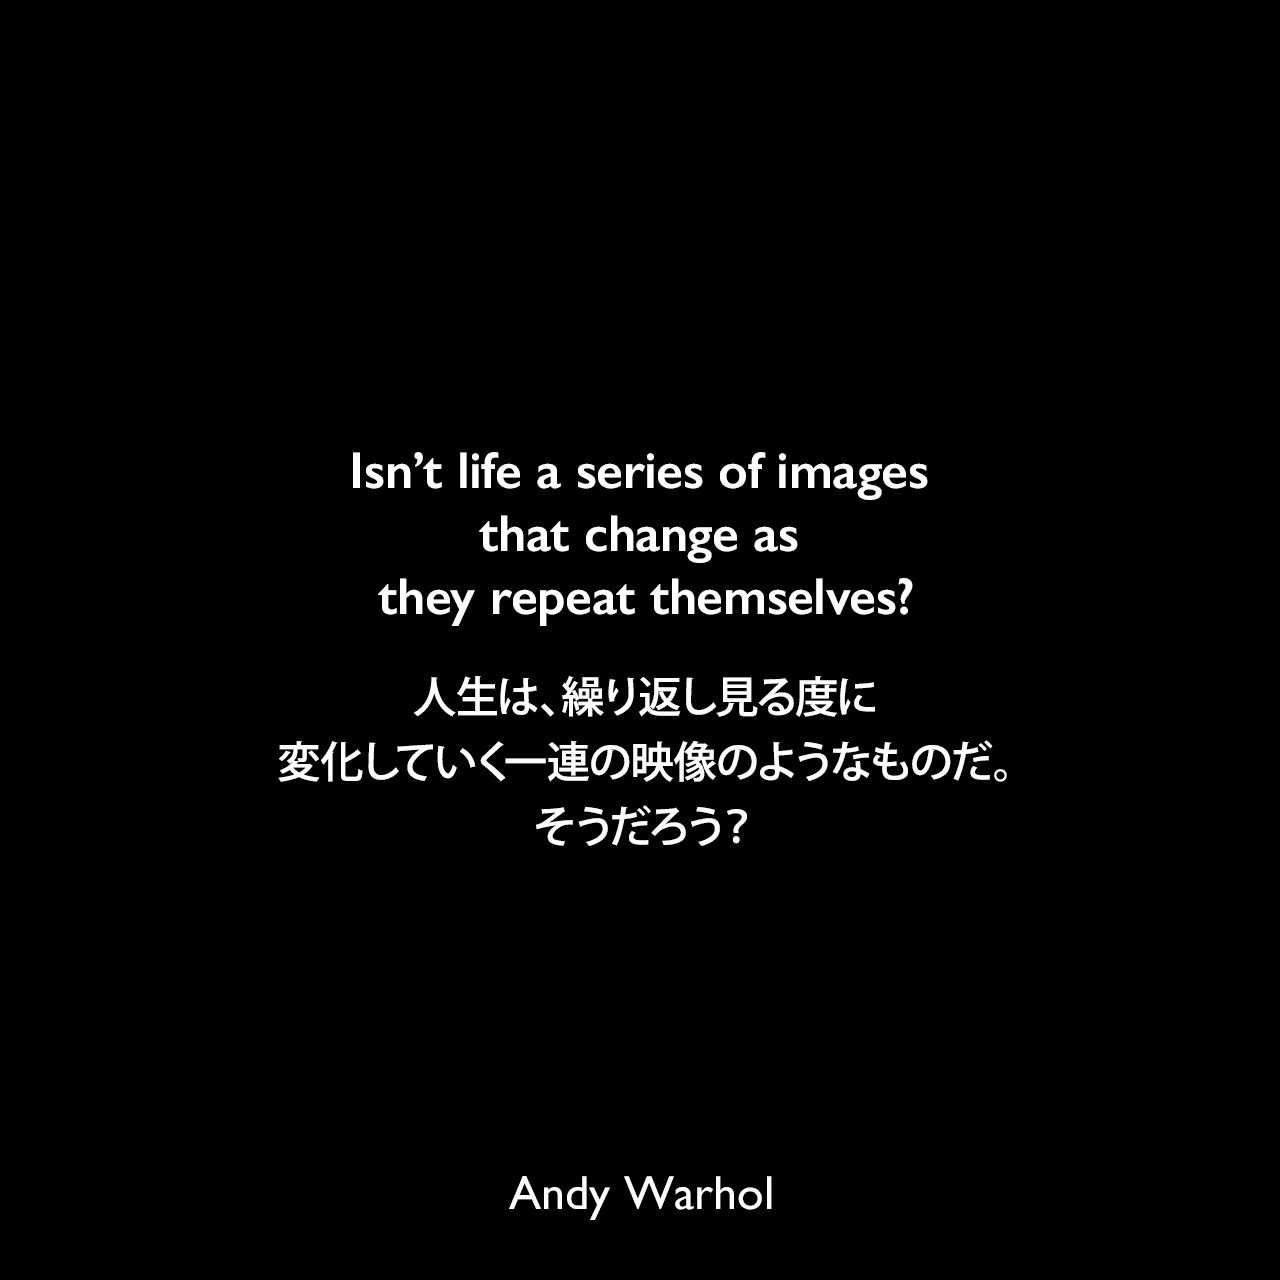 Isn’t life a series of images that change as they repeat themselves?人生は、繰り返し見る度に変化していく一連の映像のようなものだ。そうだろう？Andy Warhol